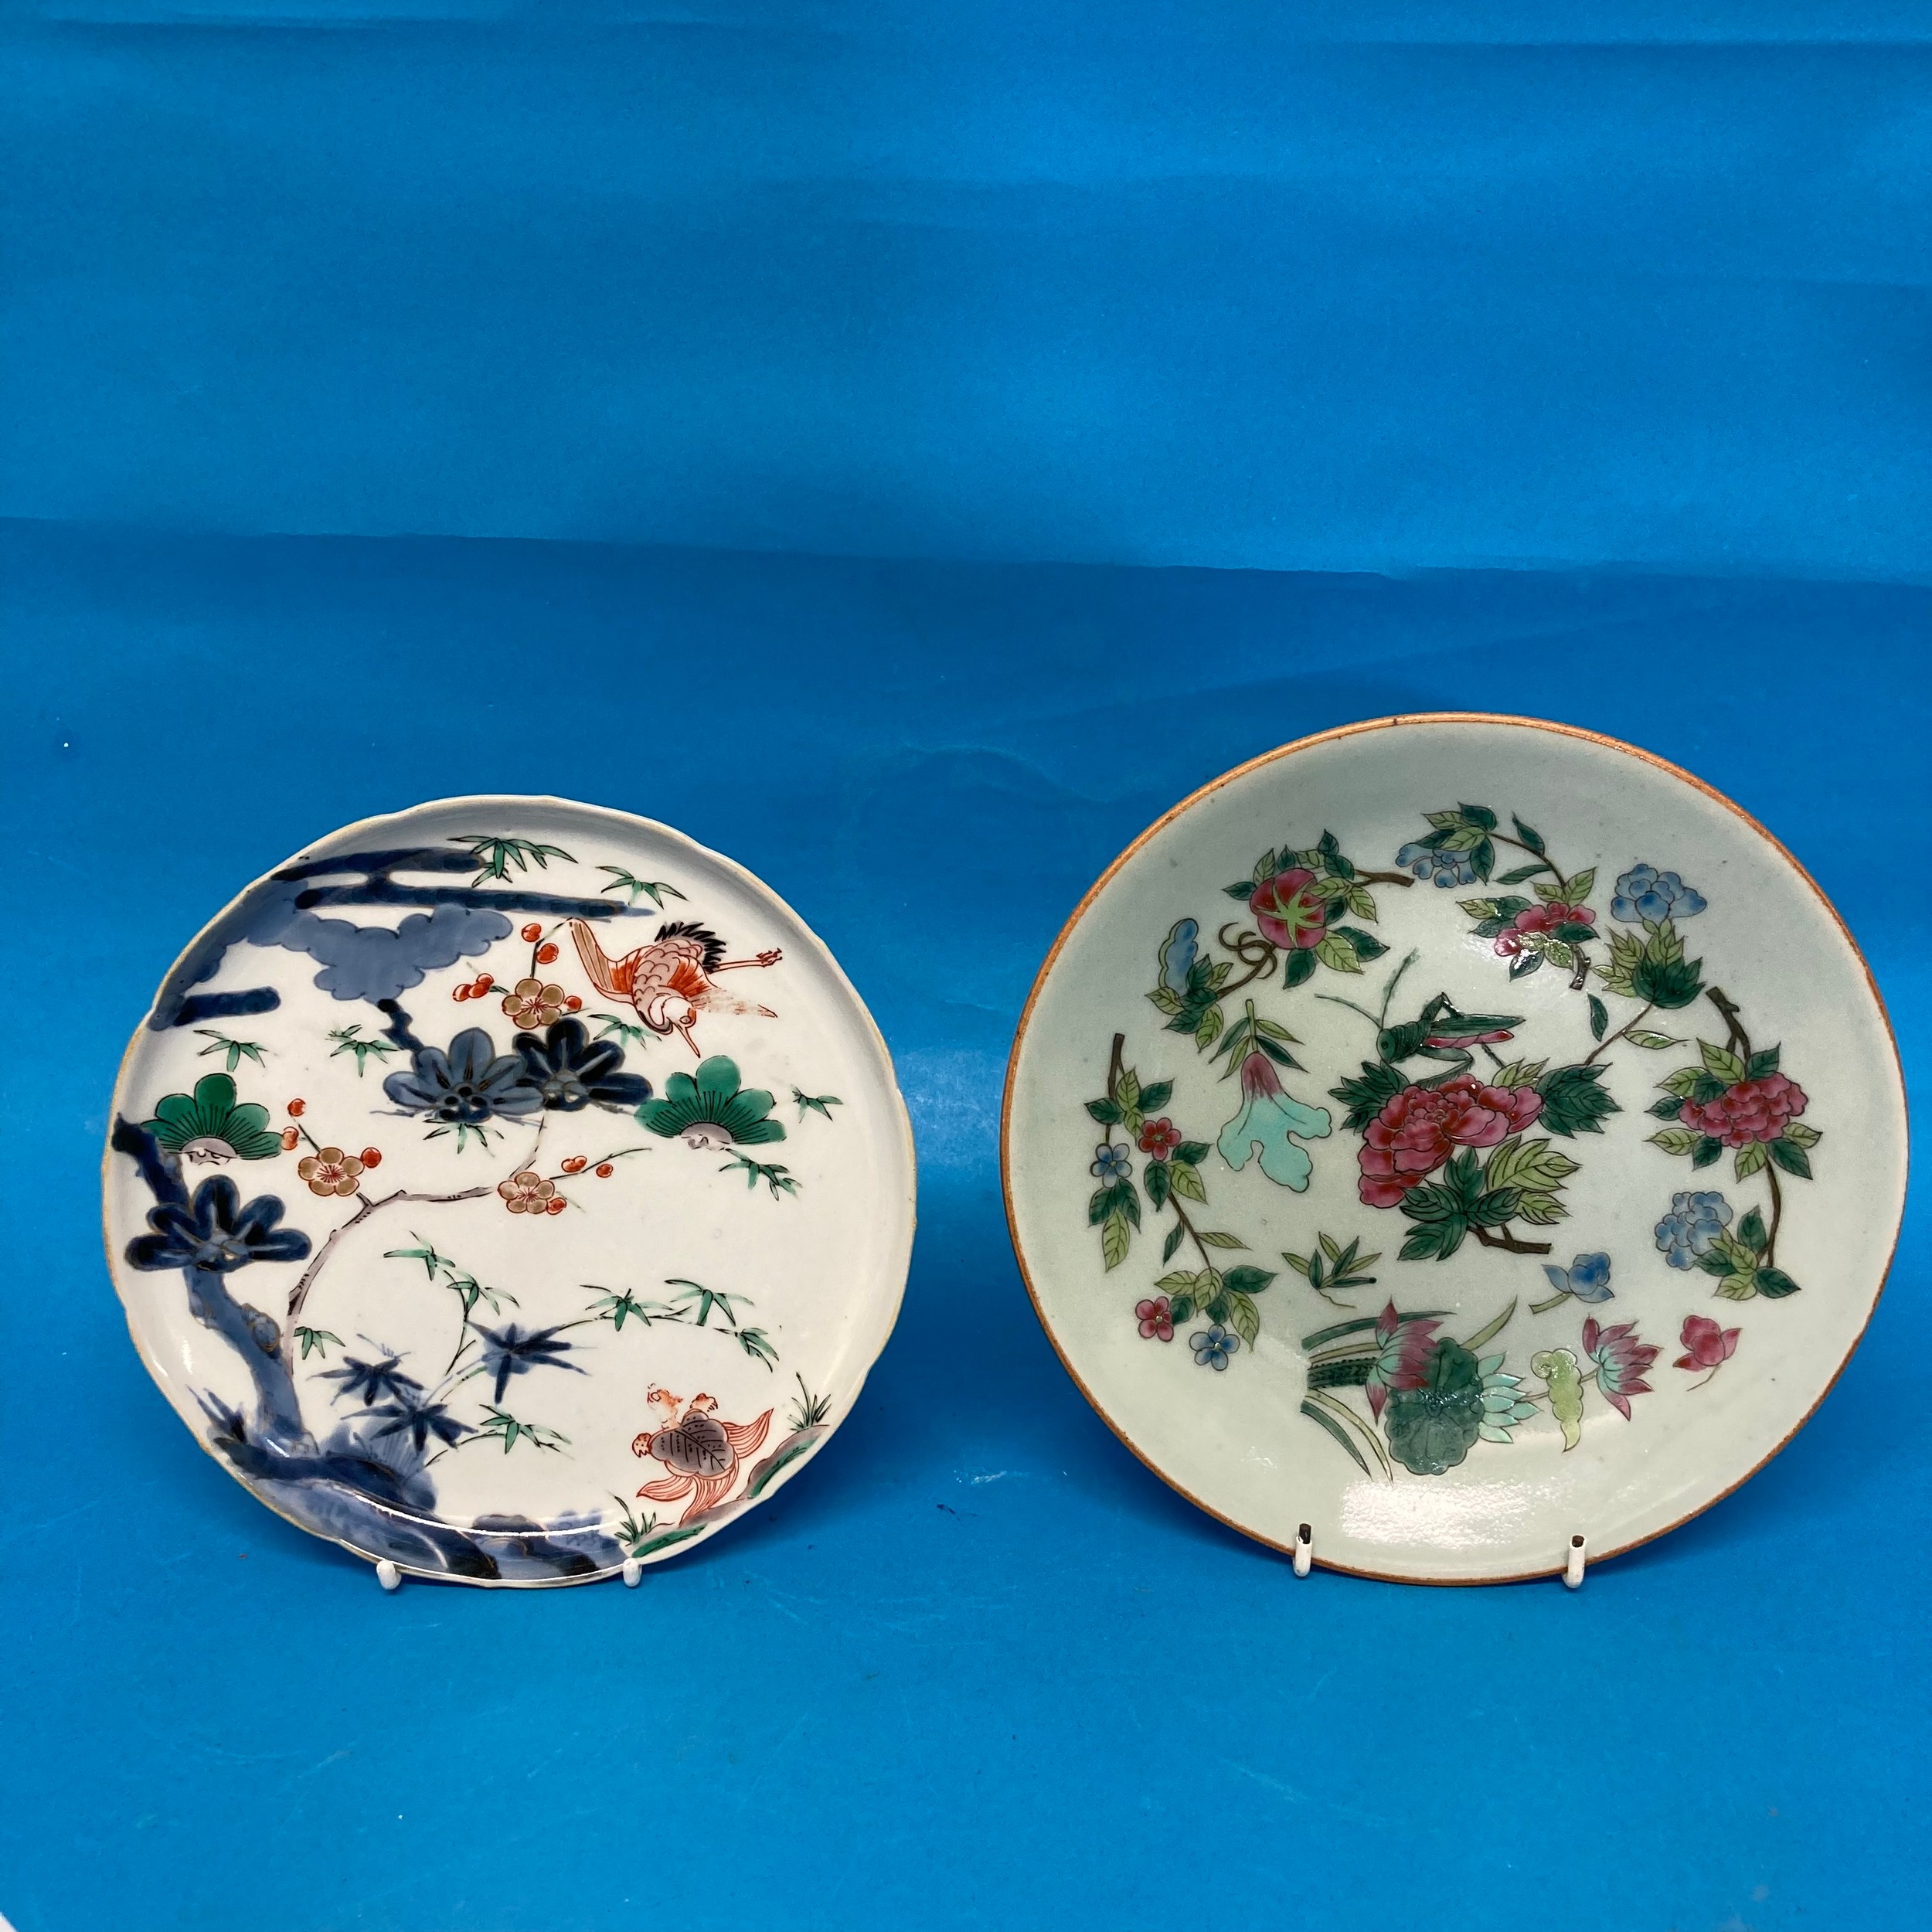 A 19thC oriental porcelain Plate, decorated in depictions of prunus branches, cranes, turtles,